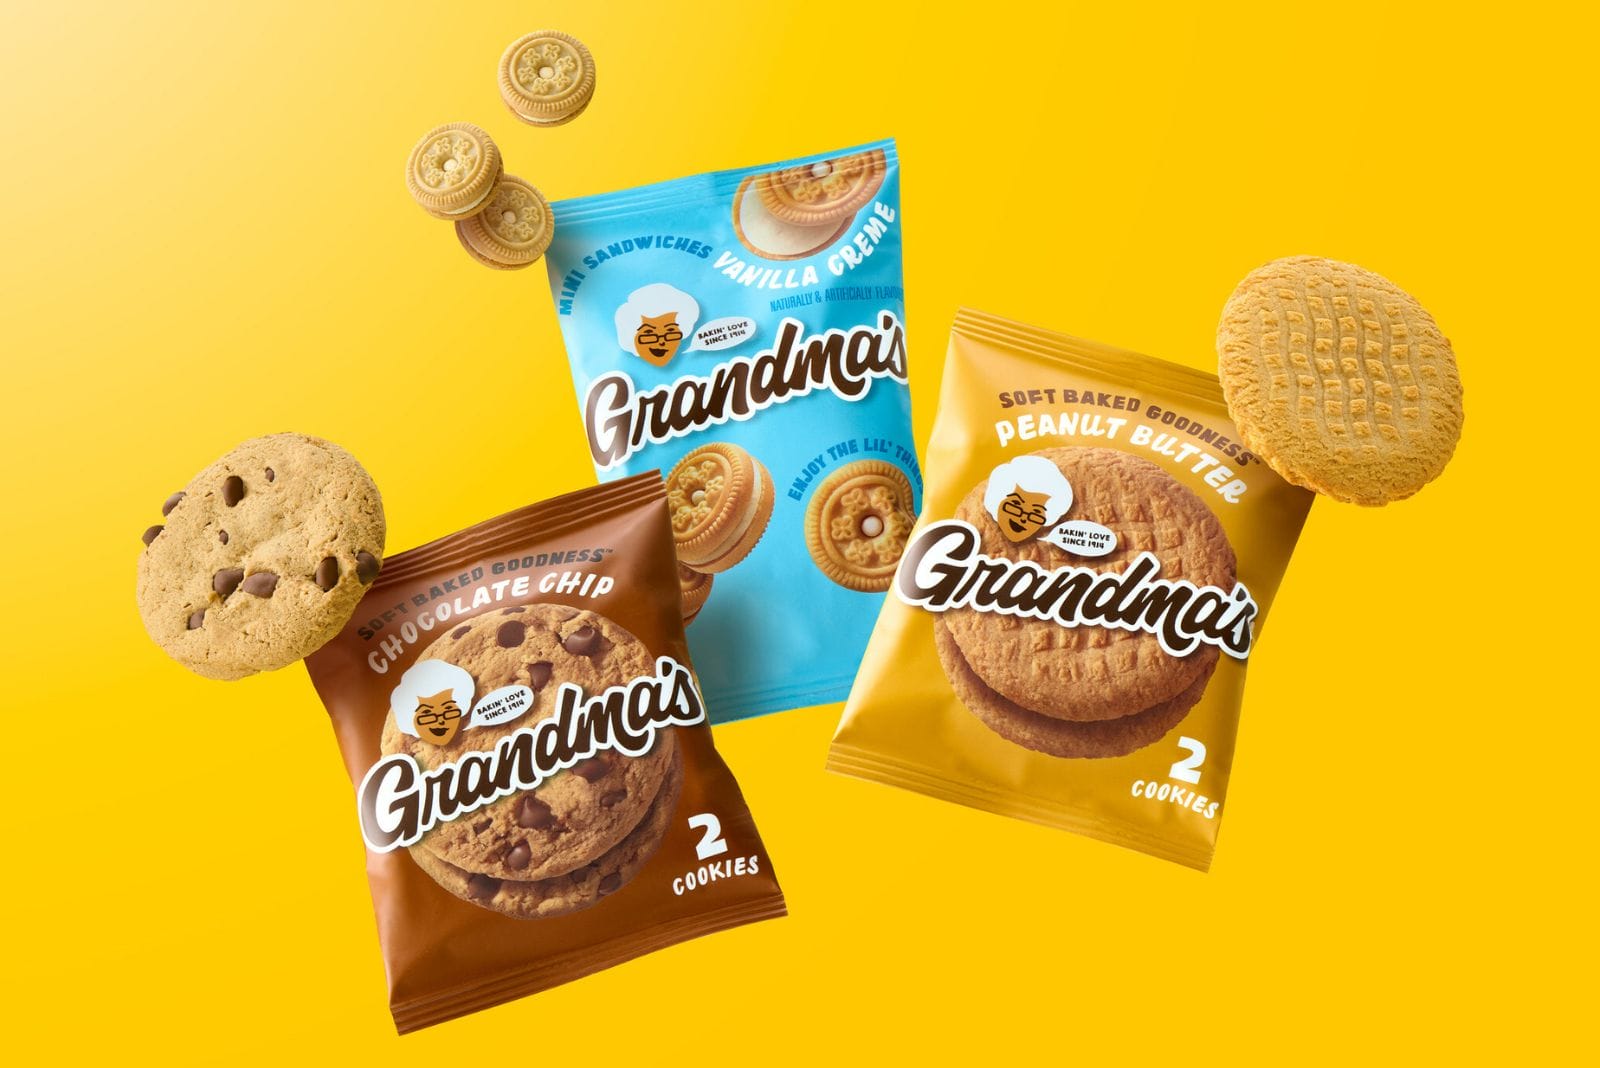 Floating packages of Grandma's Cookies in chocolate chip, vanilla creme, and peanut butter flavors